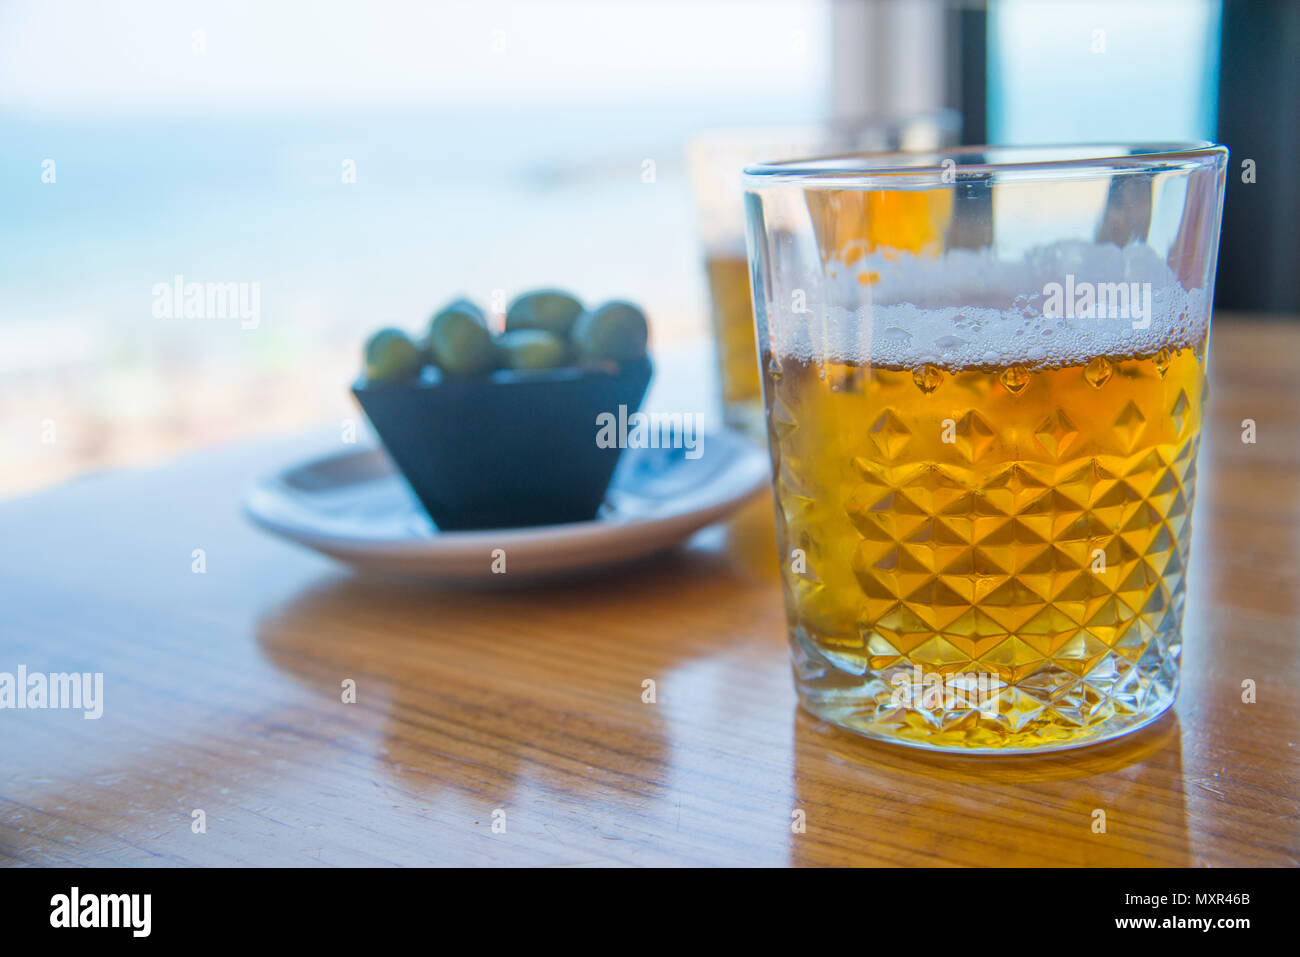 Glasses of beer and olives by the beach. Spain. Stock Photo